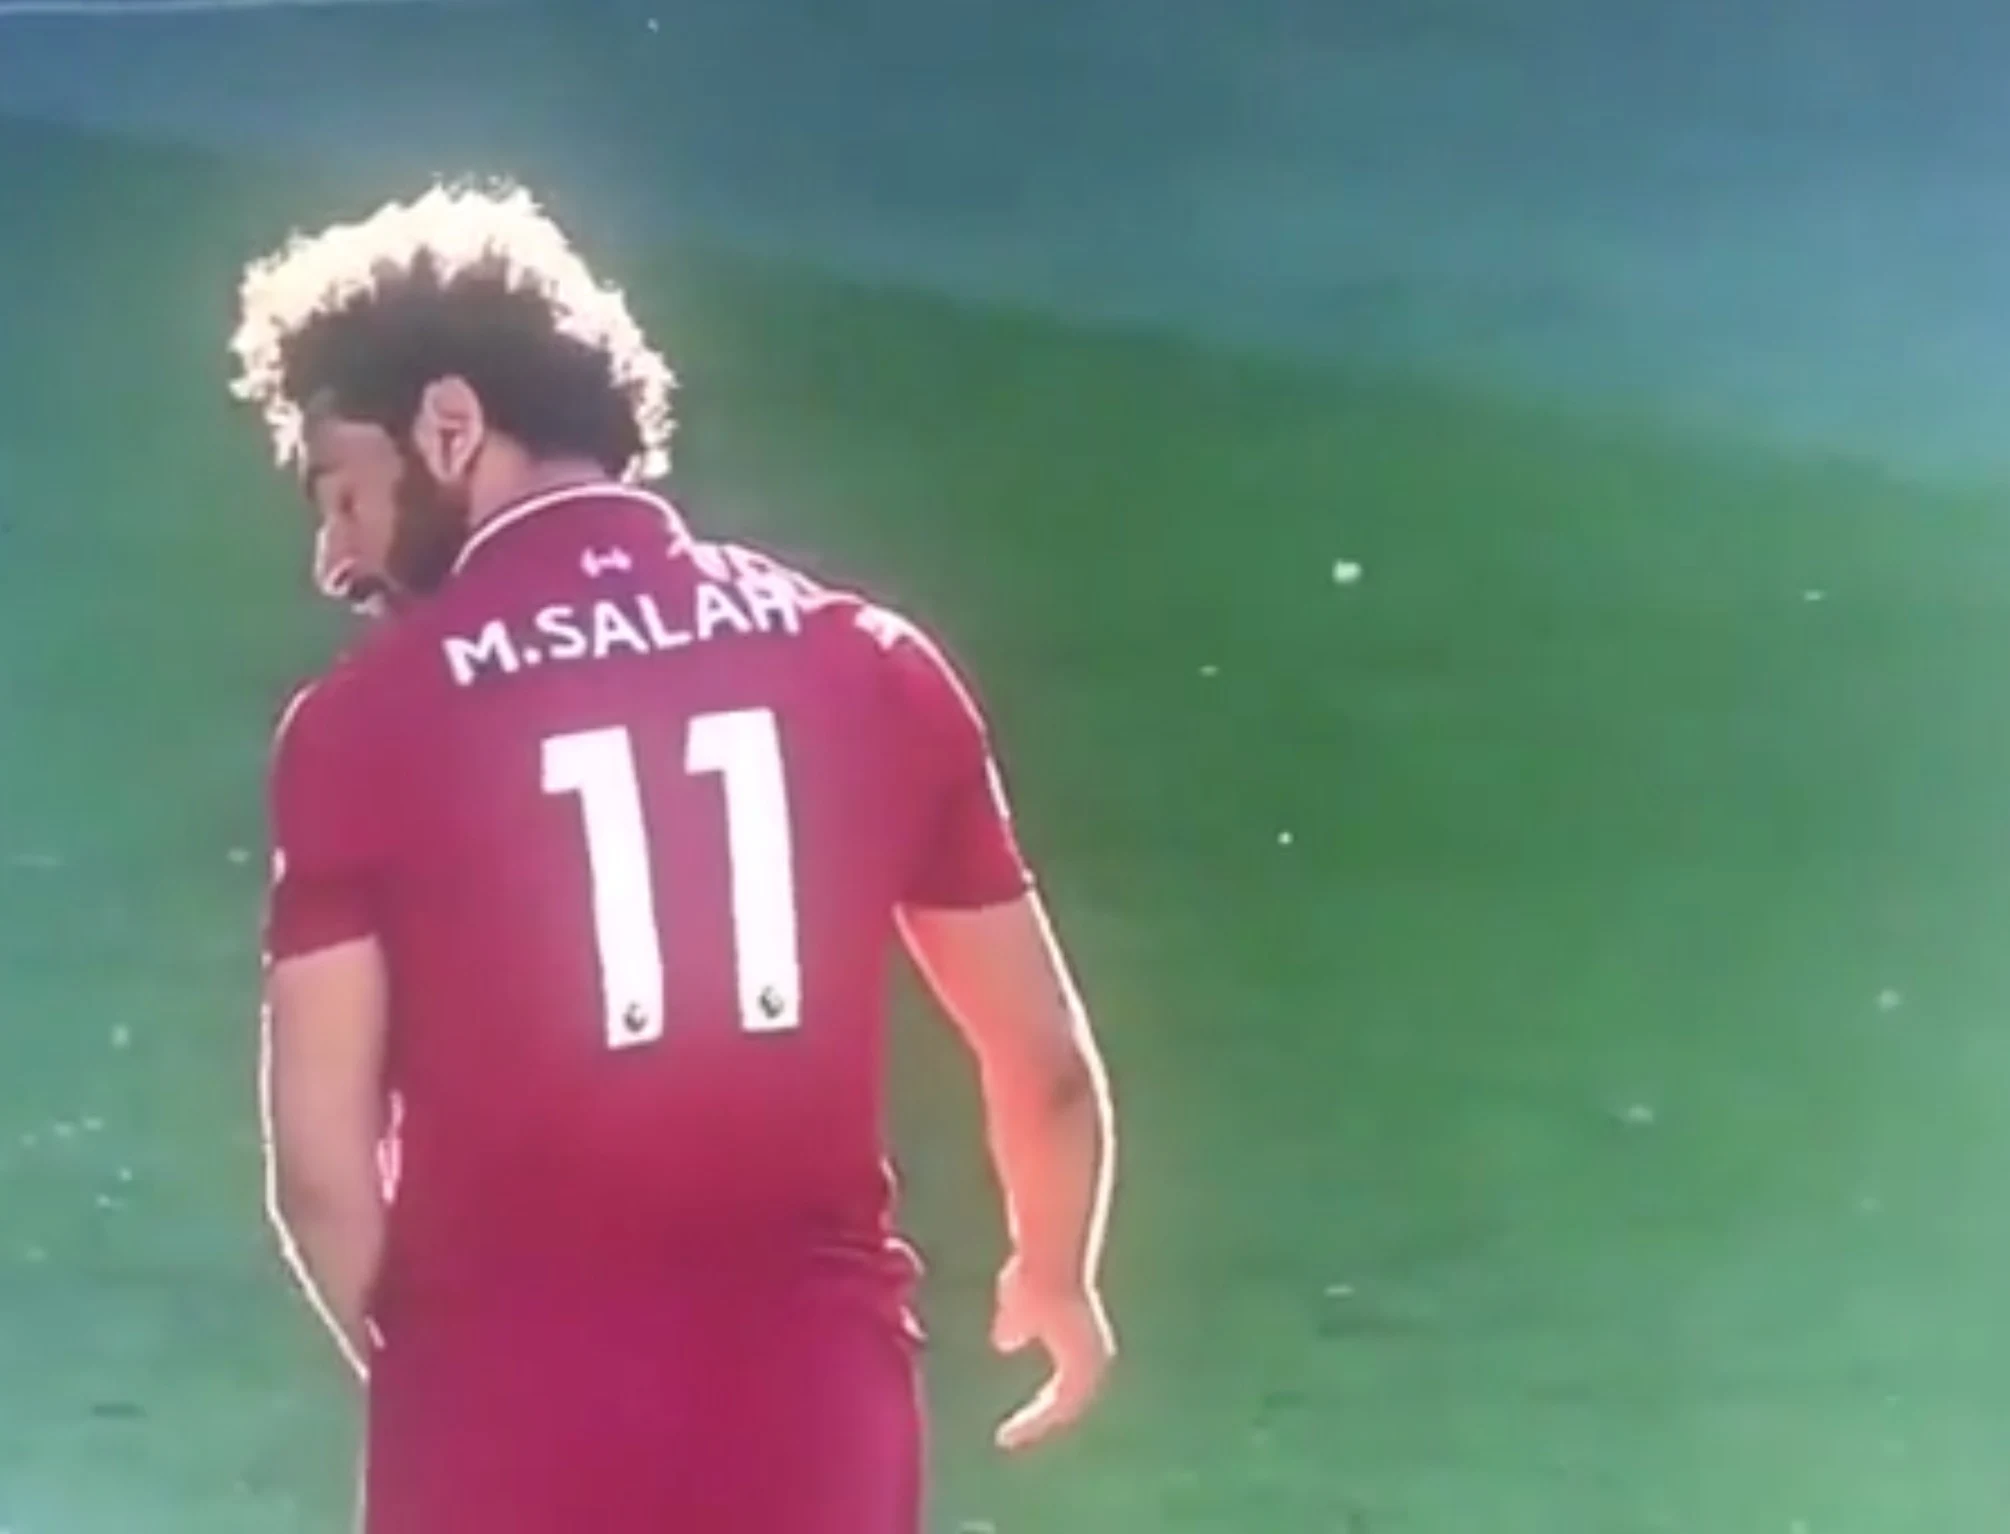 Mo Salah disappointed after Milner takes the ball away from him